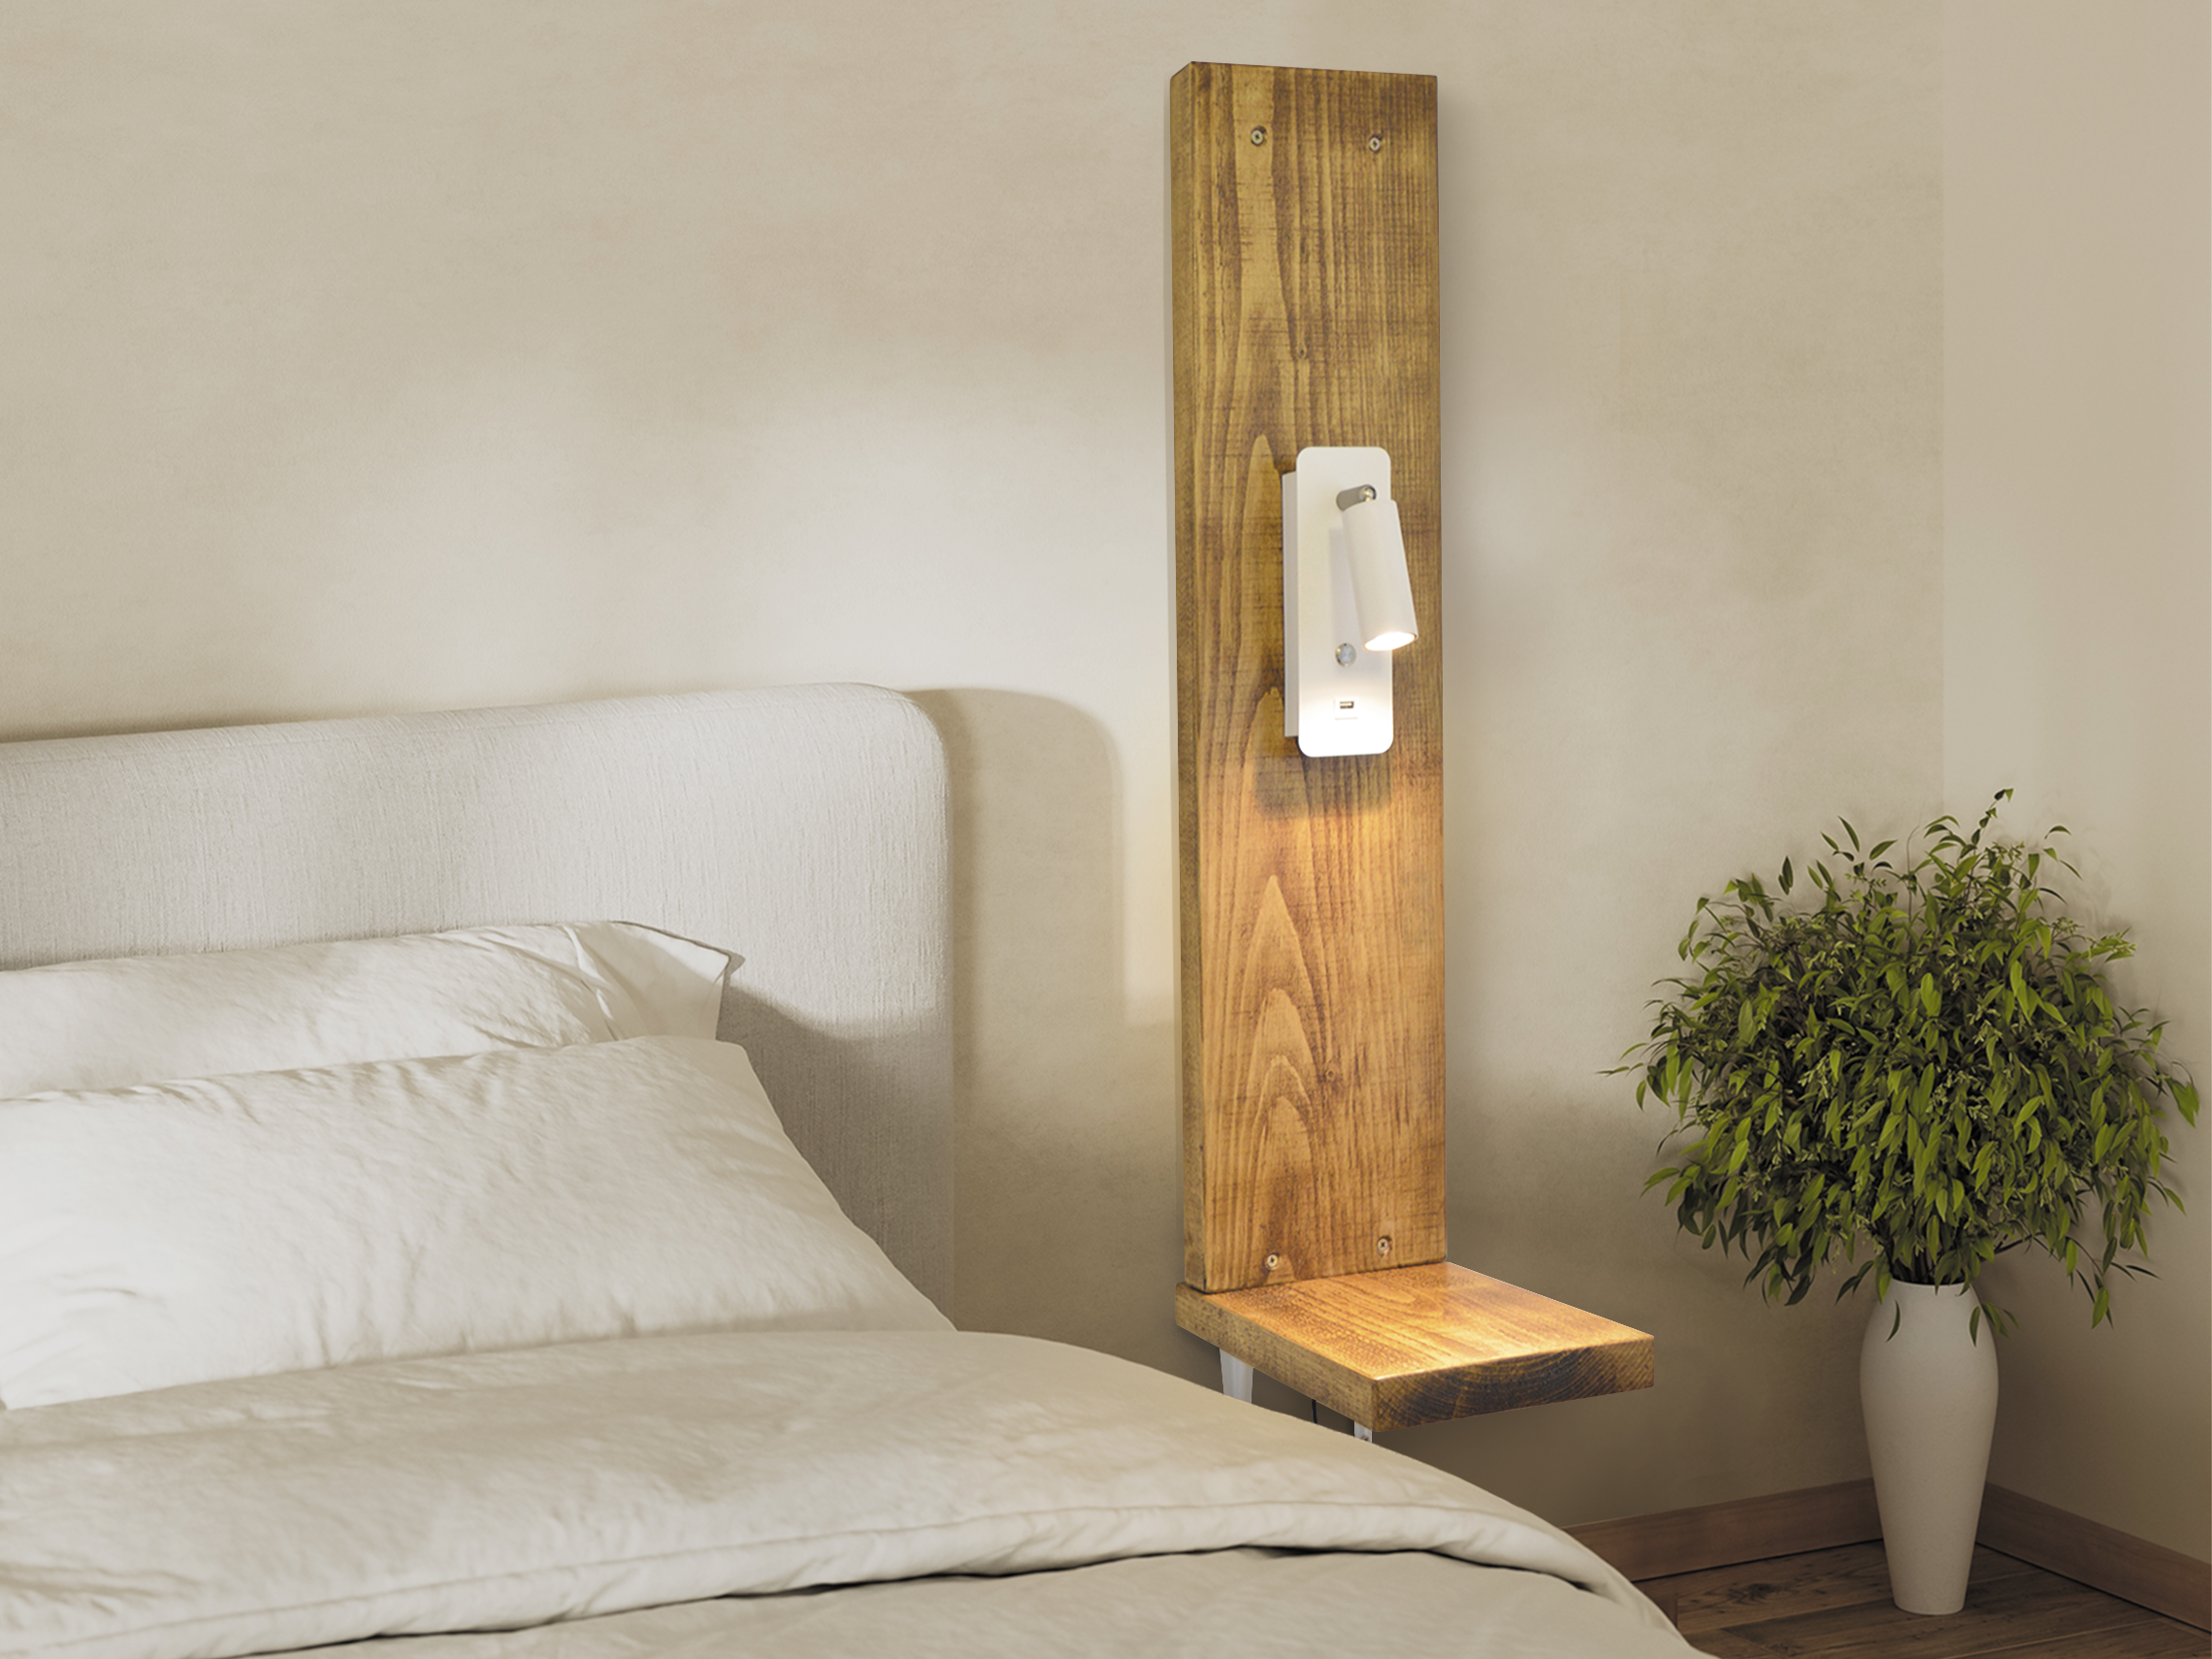 floating nightstand with an adjustable reading light.